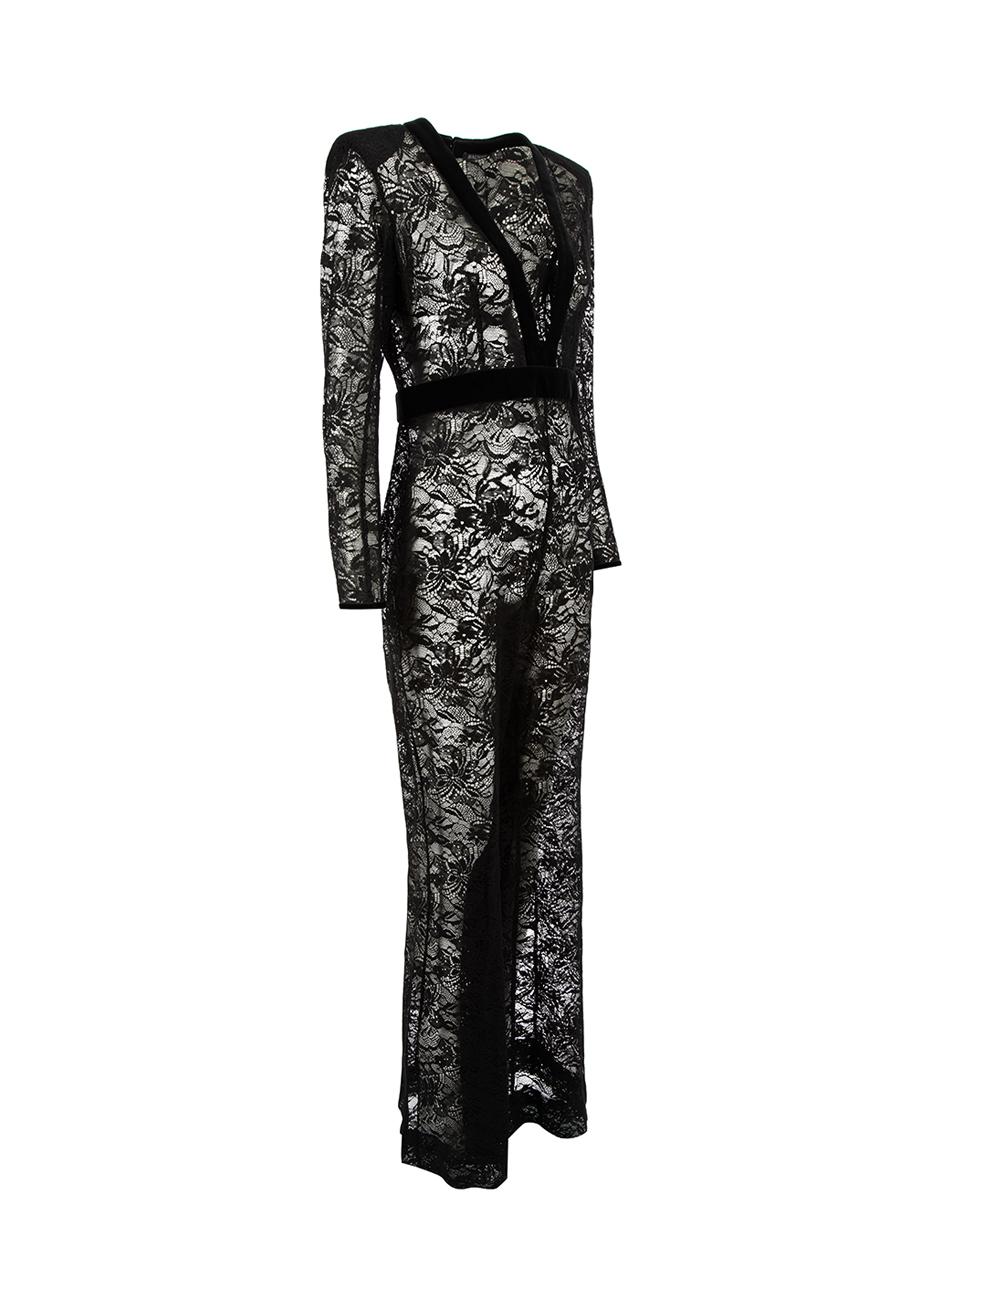 CONDITION is Very good. Hardly any visible wear to jumpsuit is evident on this used Balmain designer resale item.



Details


Black

Cotton

Jumpsuit

Floral lace

See through

Plunge neck

Velvet trim

Long sleeves

Flared bottoms

Back zip